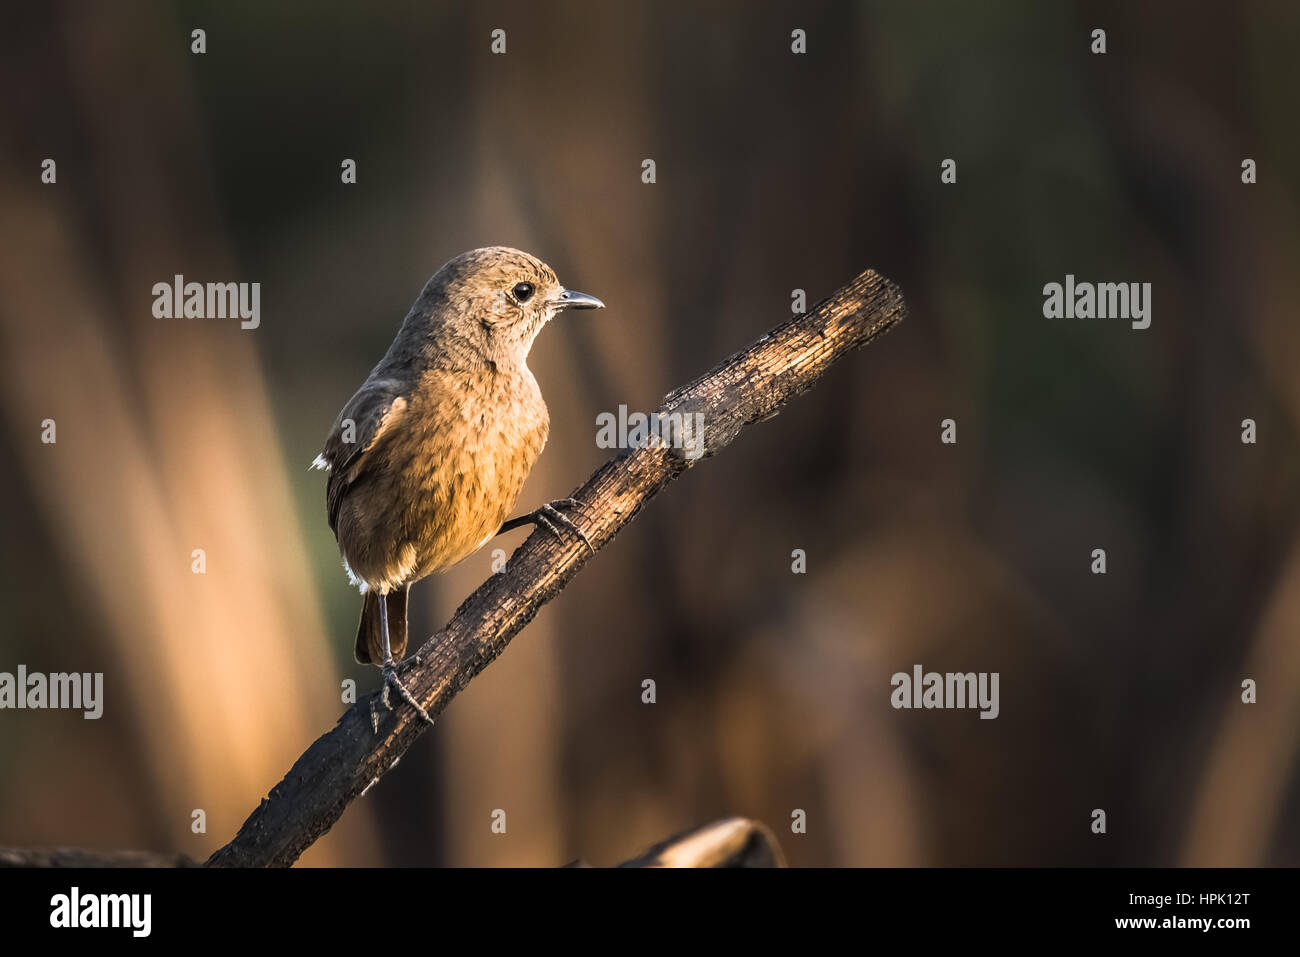 Female pied bush chat perched and watching Stock Photo